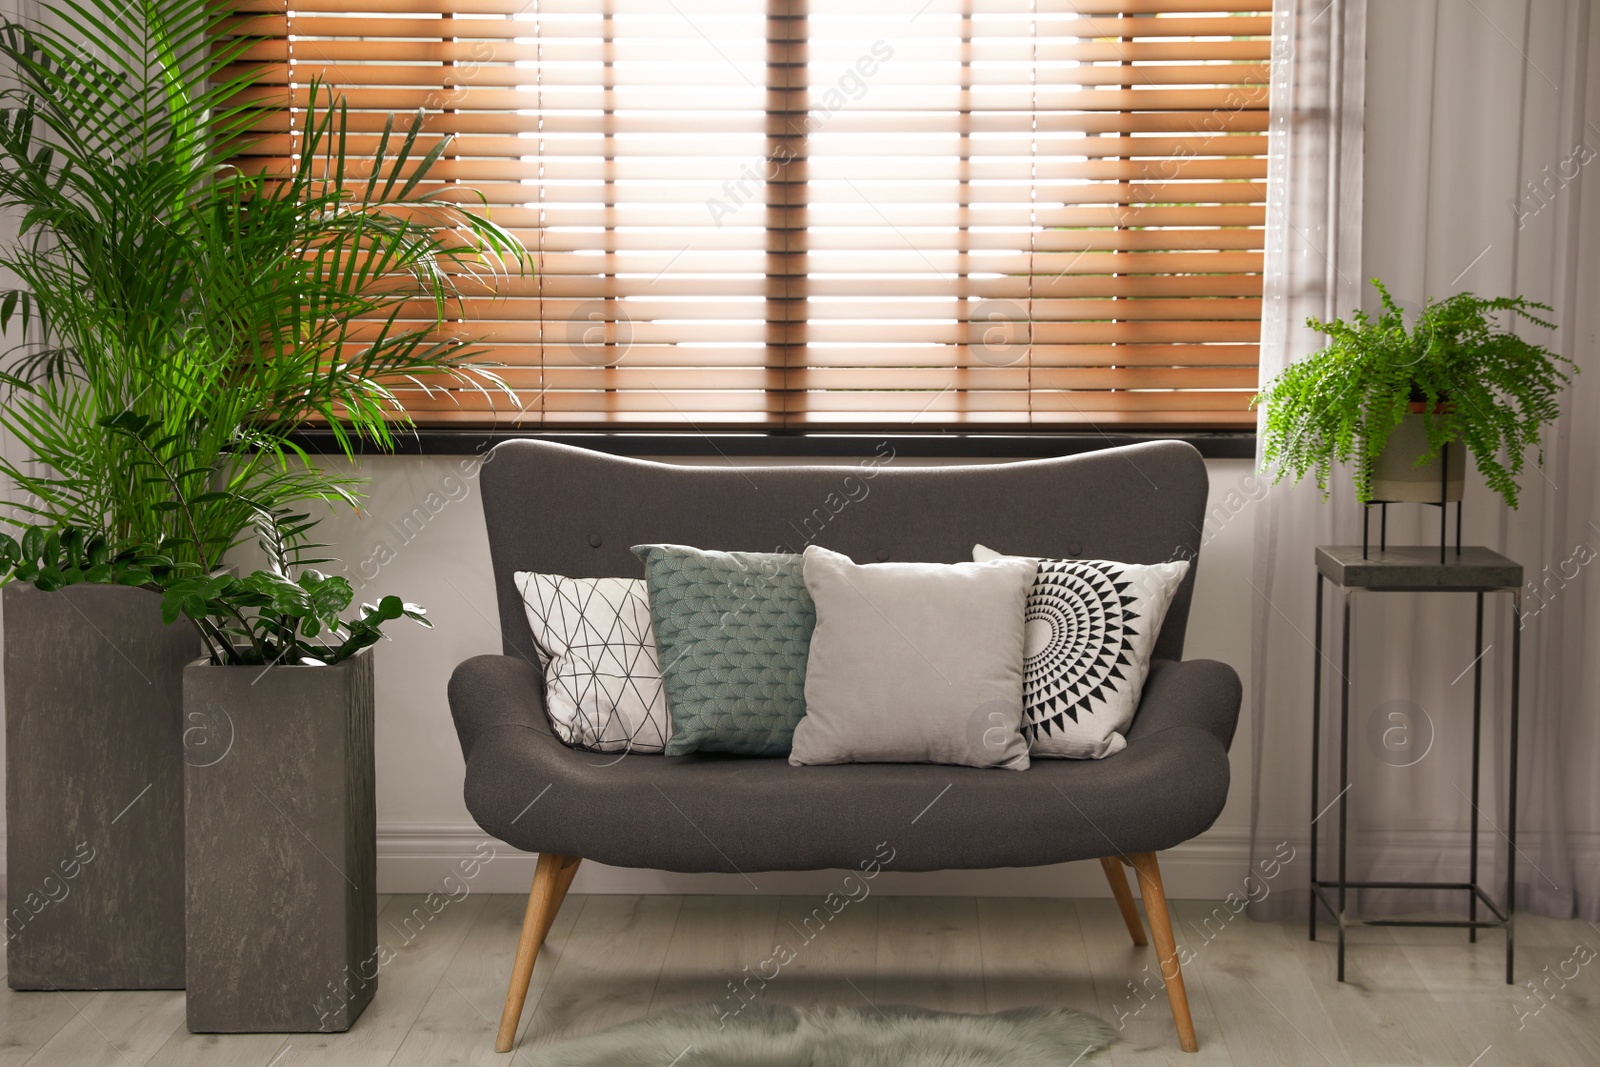 Photo of Stylish decorative pillows on grey couch indoors